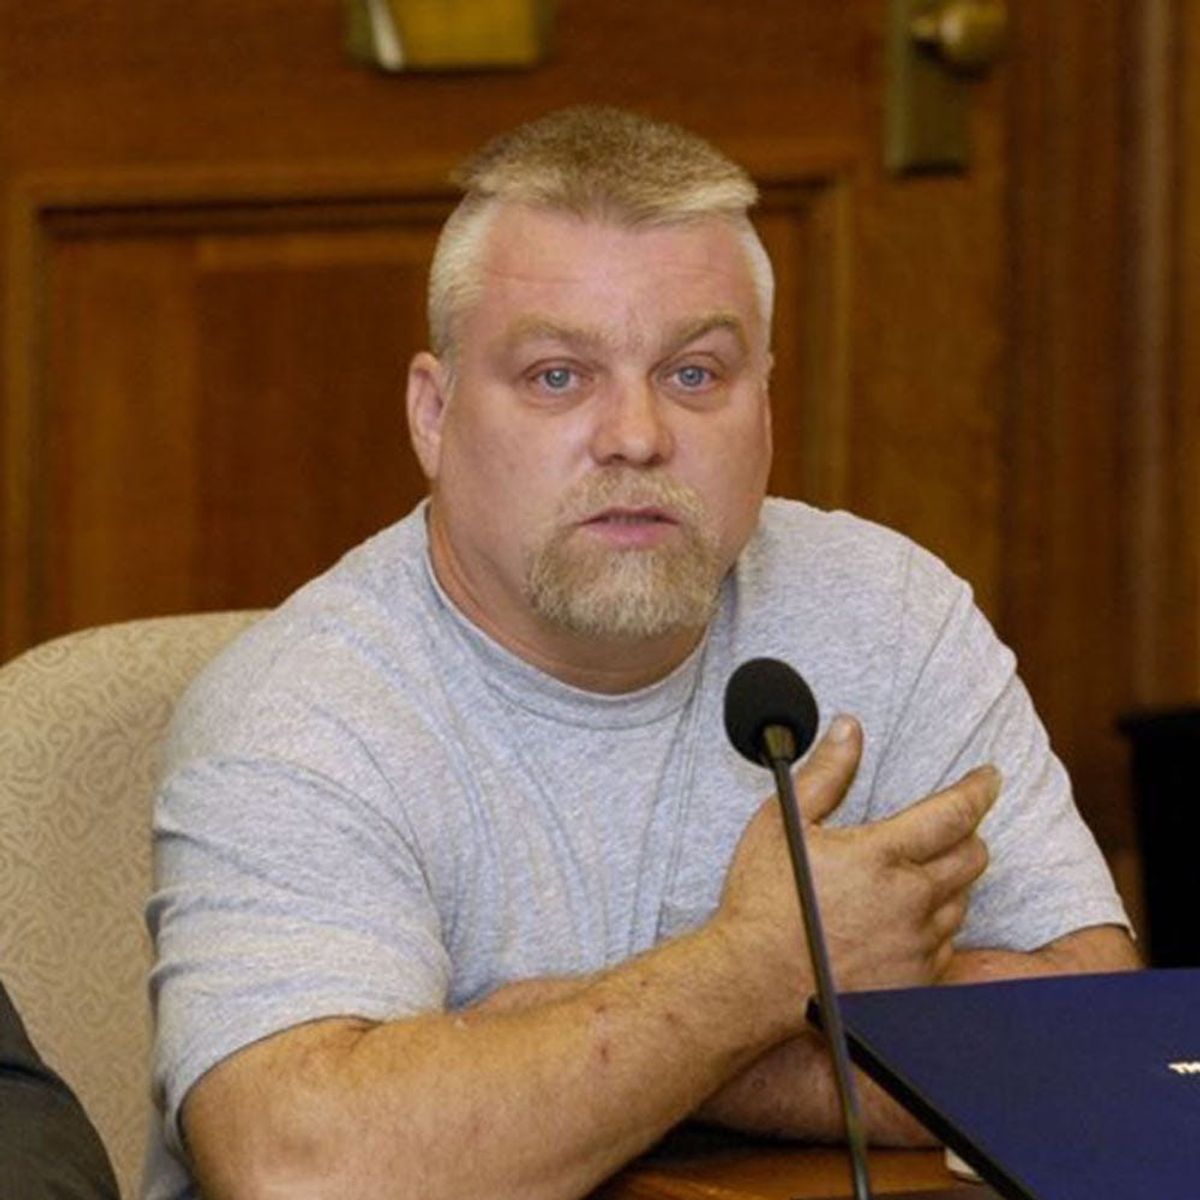 A New ‘Making a Murderer’ Follow-Up Series Is in the Works